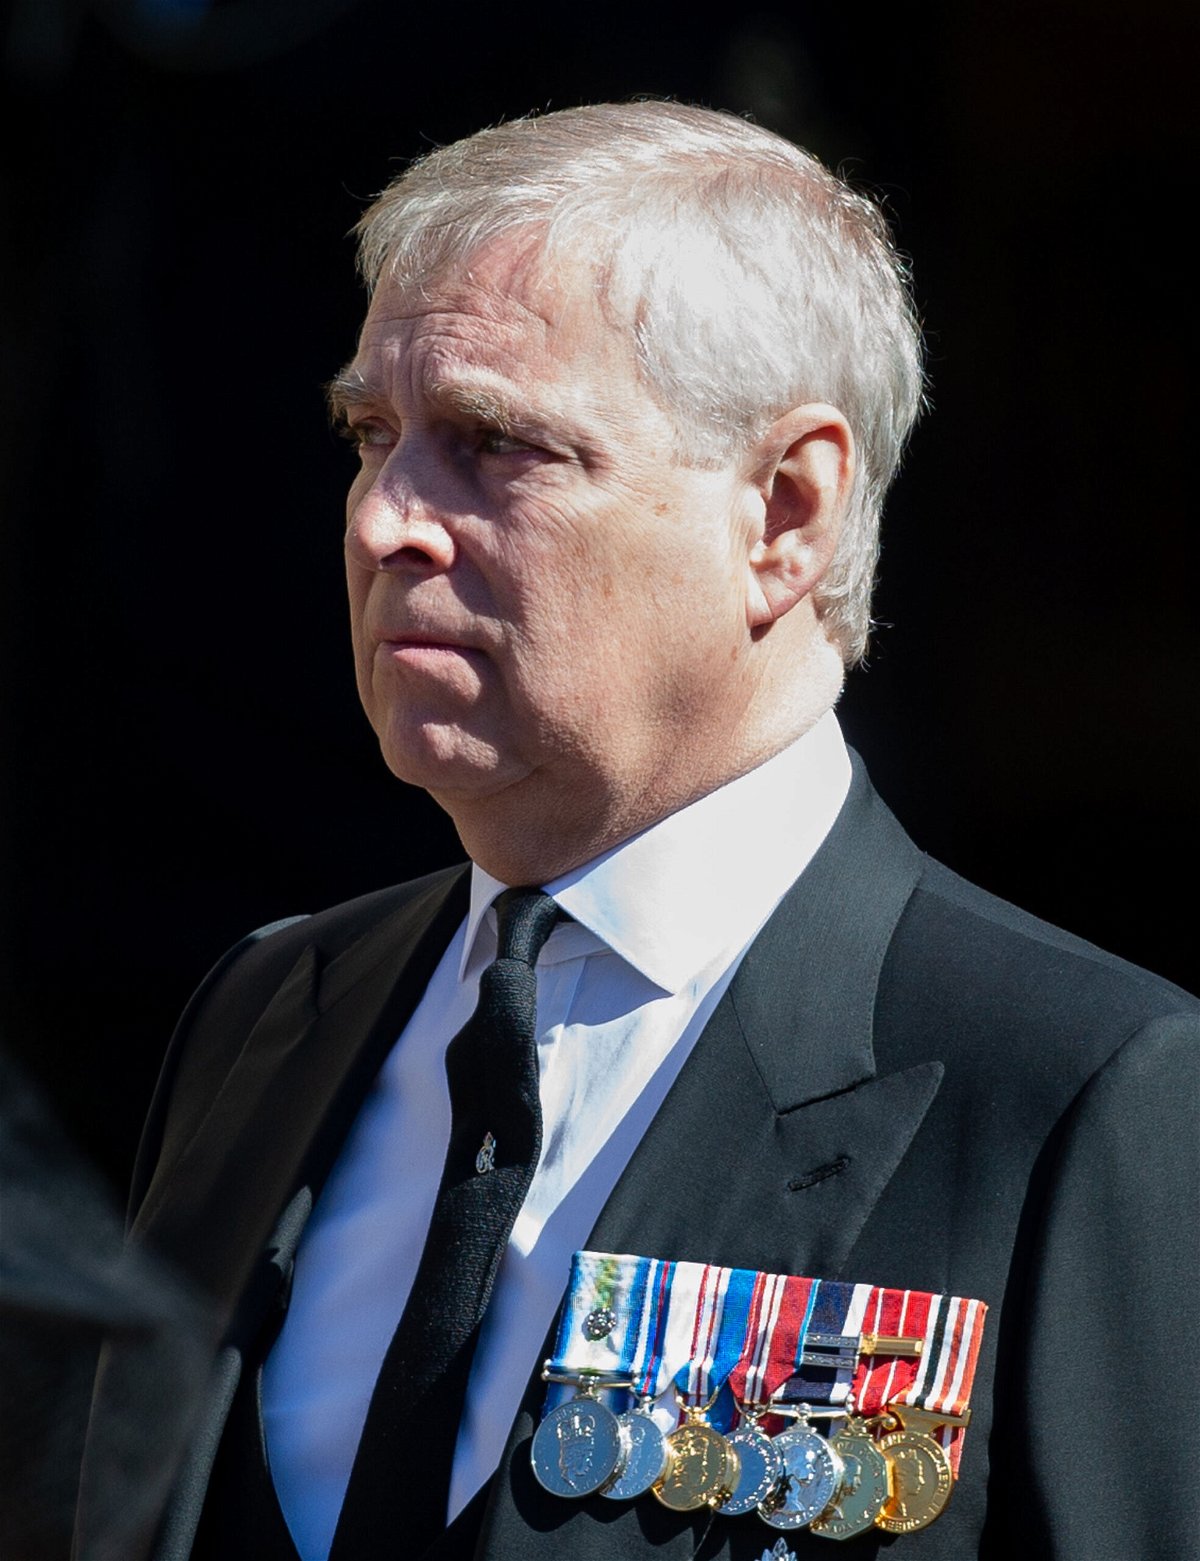 <i>Samir Hussein/WireImage/Getty Images</i><br/>Prince Andrew